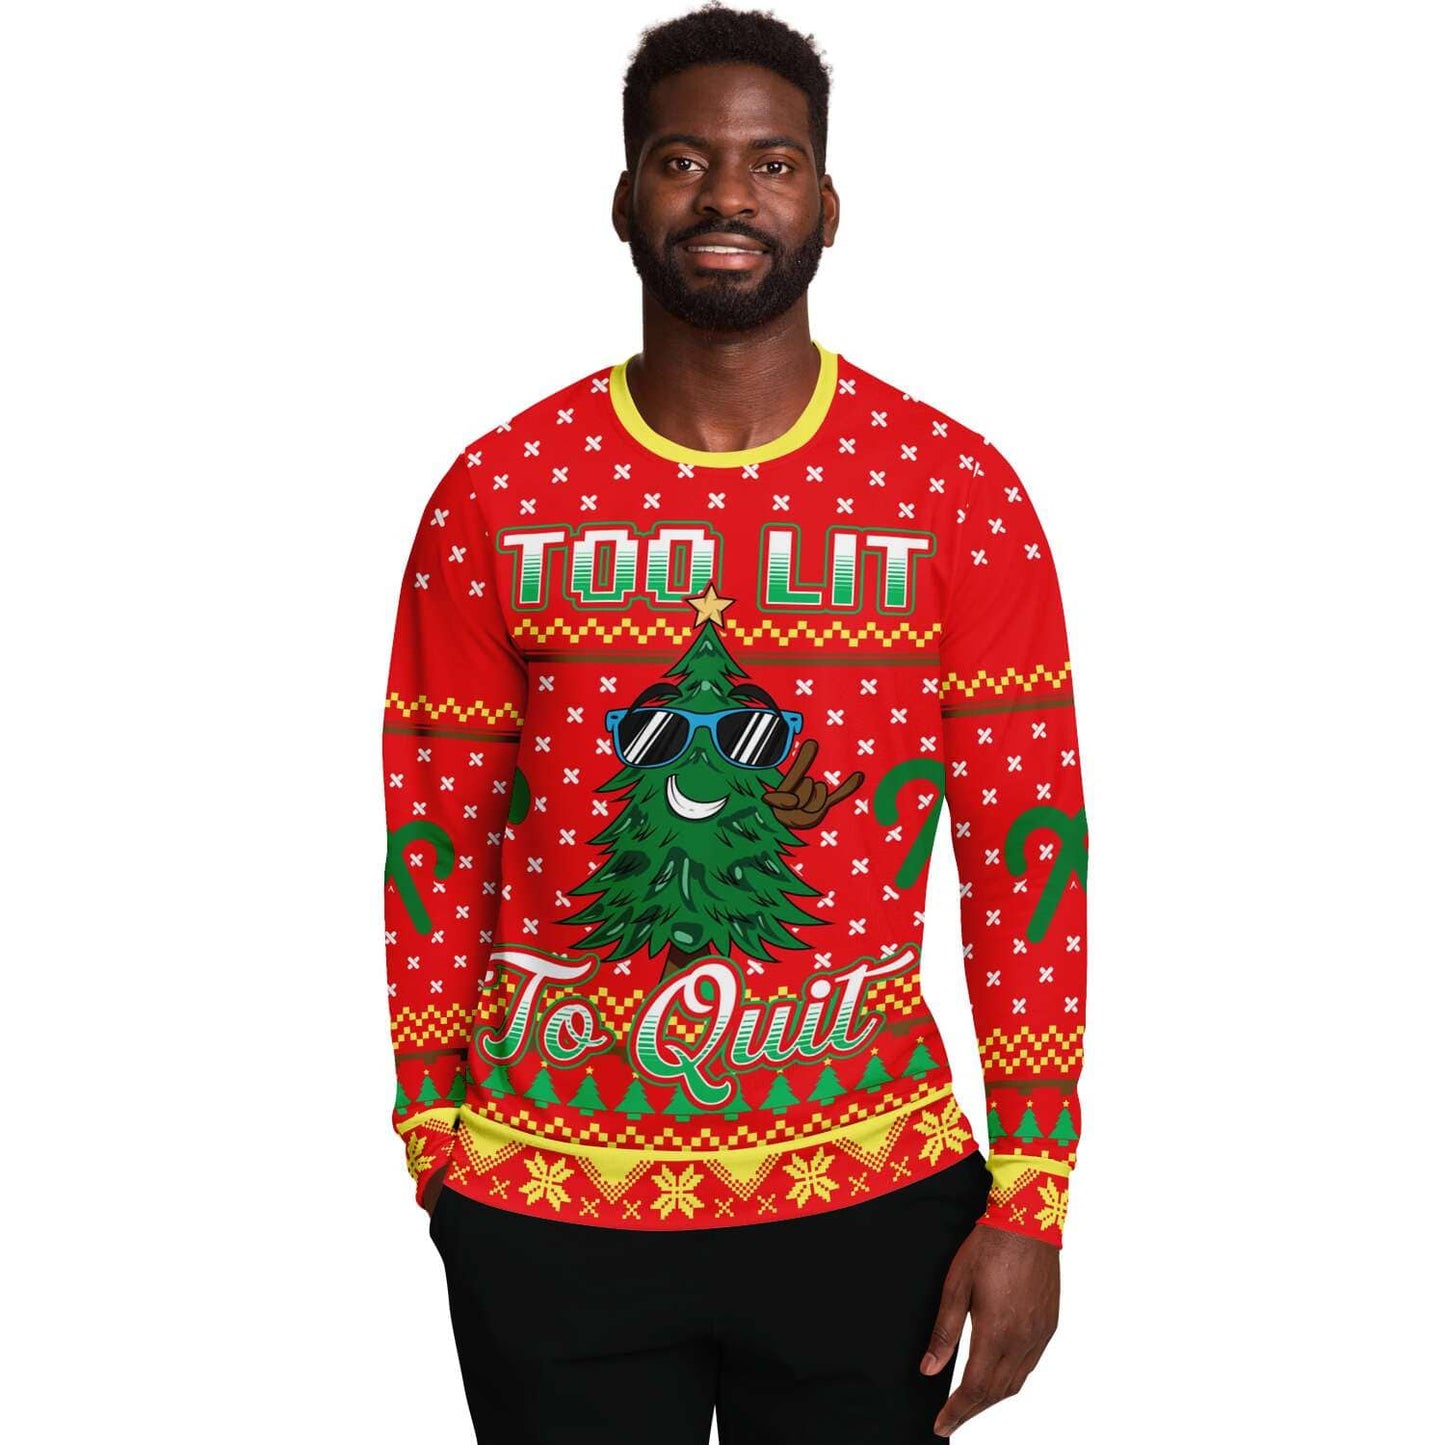 SUBLIMINATOR Too Lit To Quit Ugly Christmas Sweaters Sweatshirt